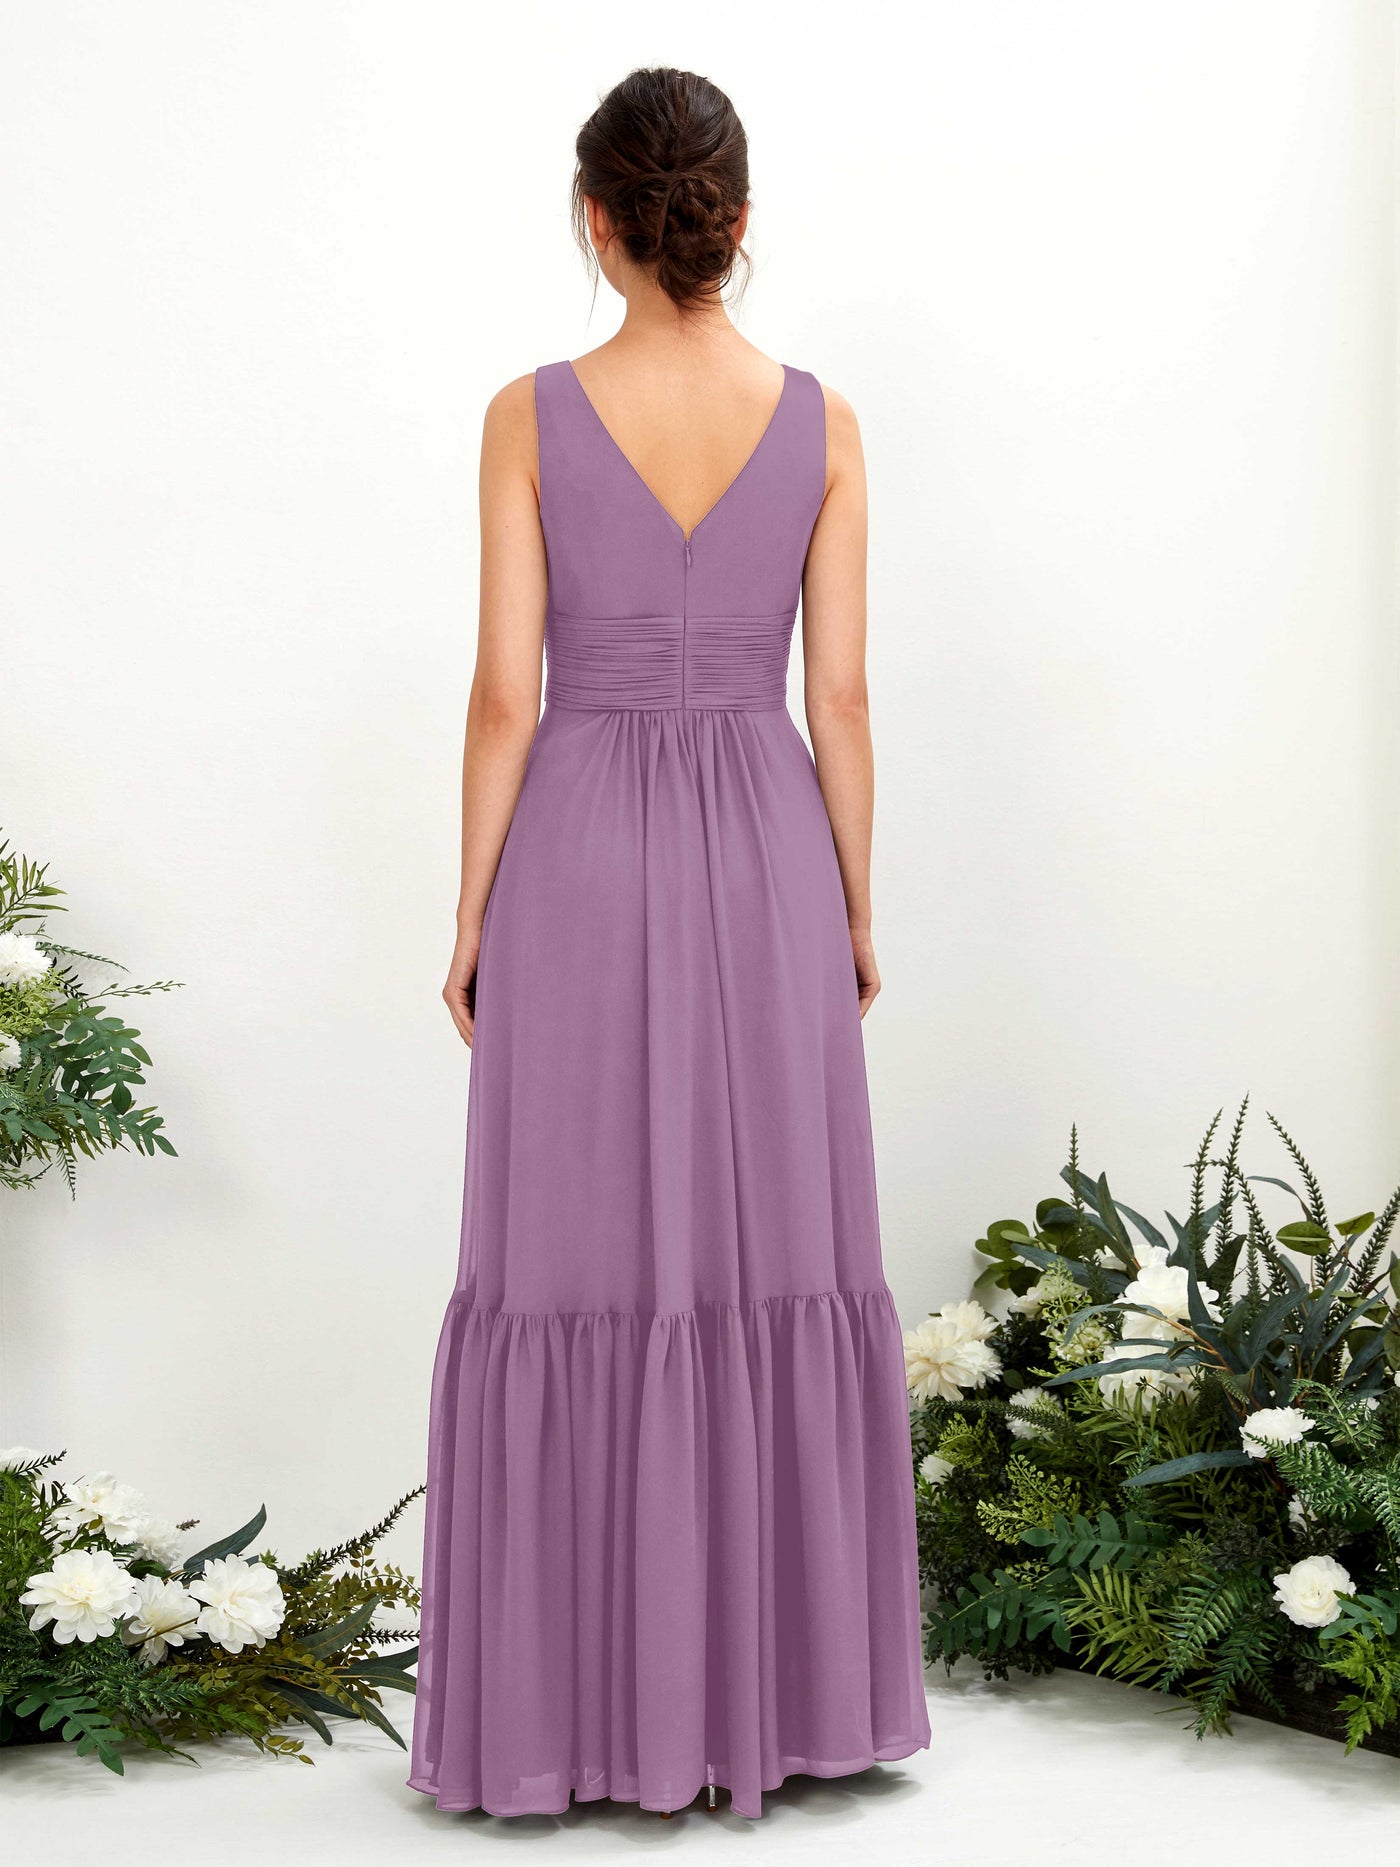 Orchid Mist Bridesmaid Dresses Bridesmaid Dress A-line Chiffon Straps Full Length Sleeveless Wedding Party Dress (80223721)#color_orchid-mist